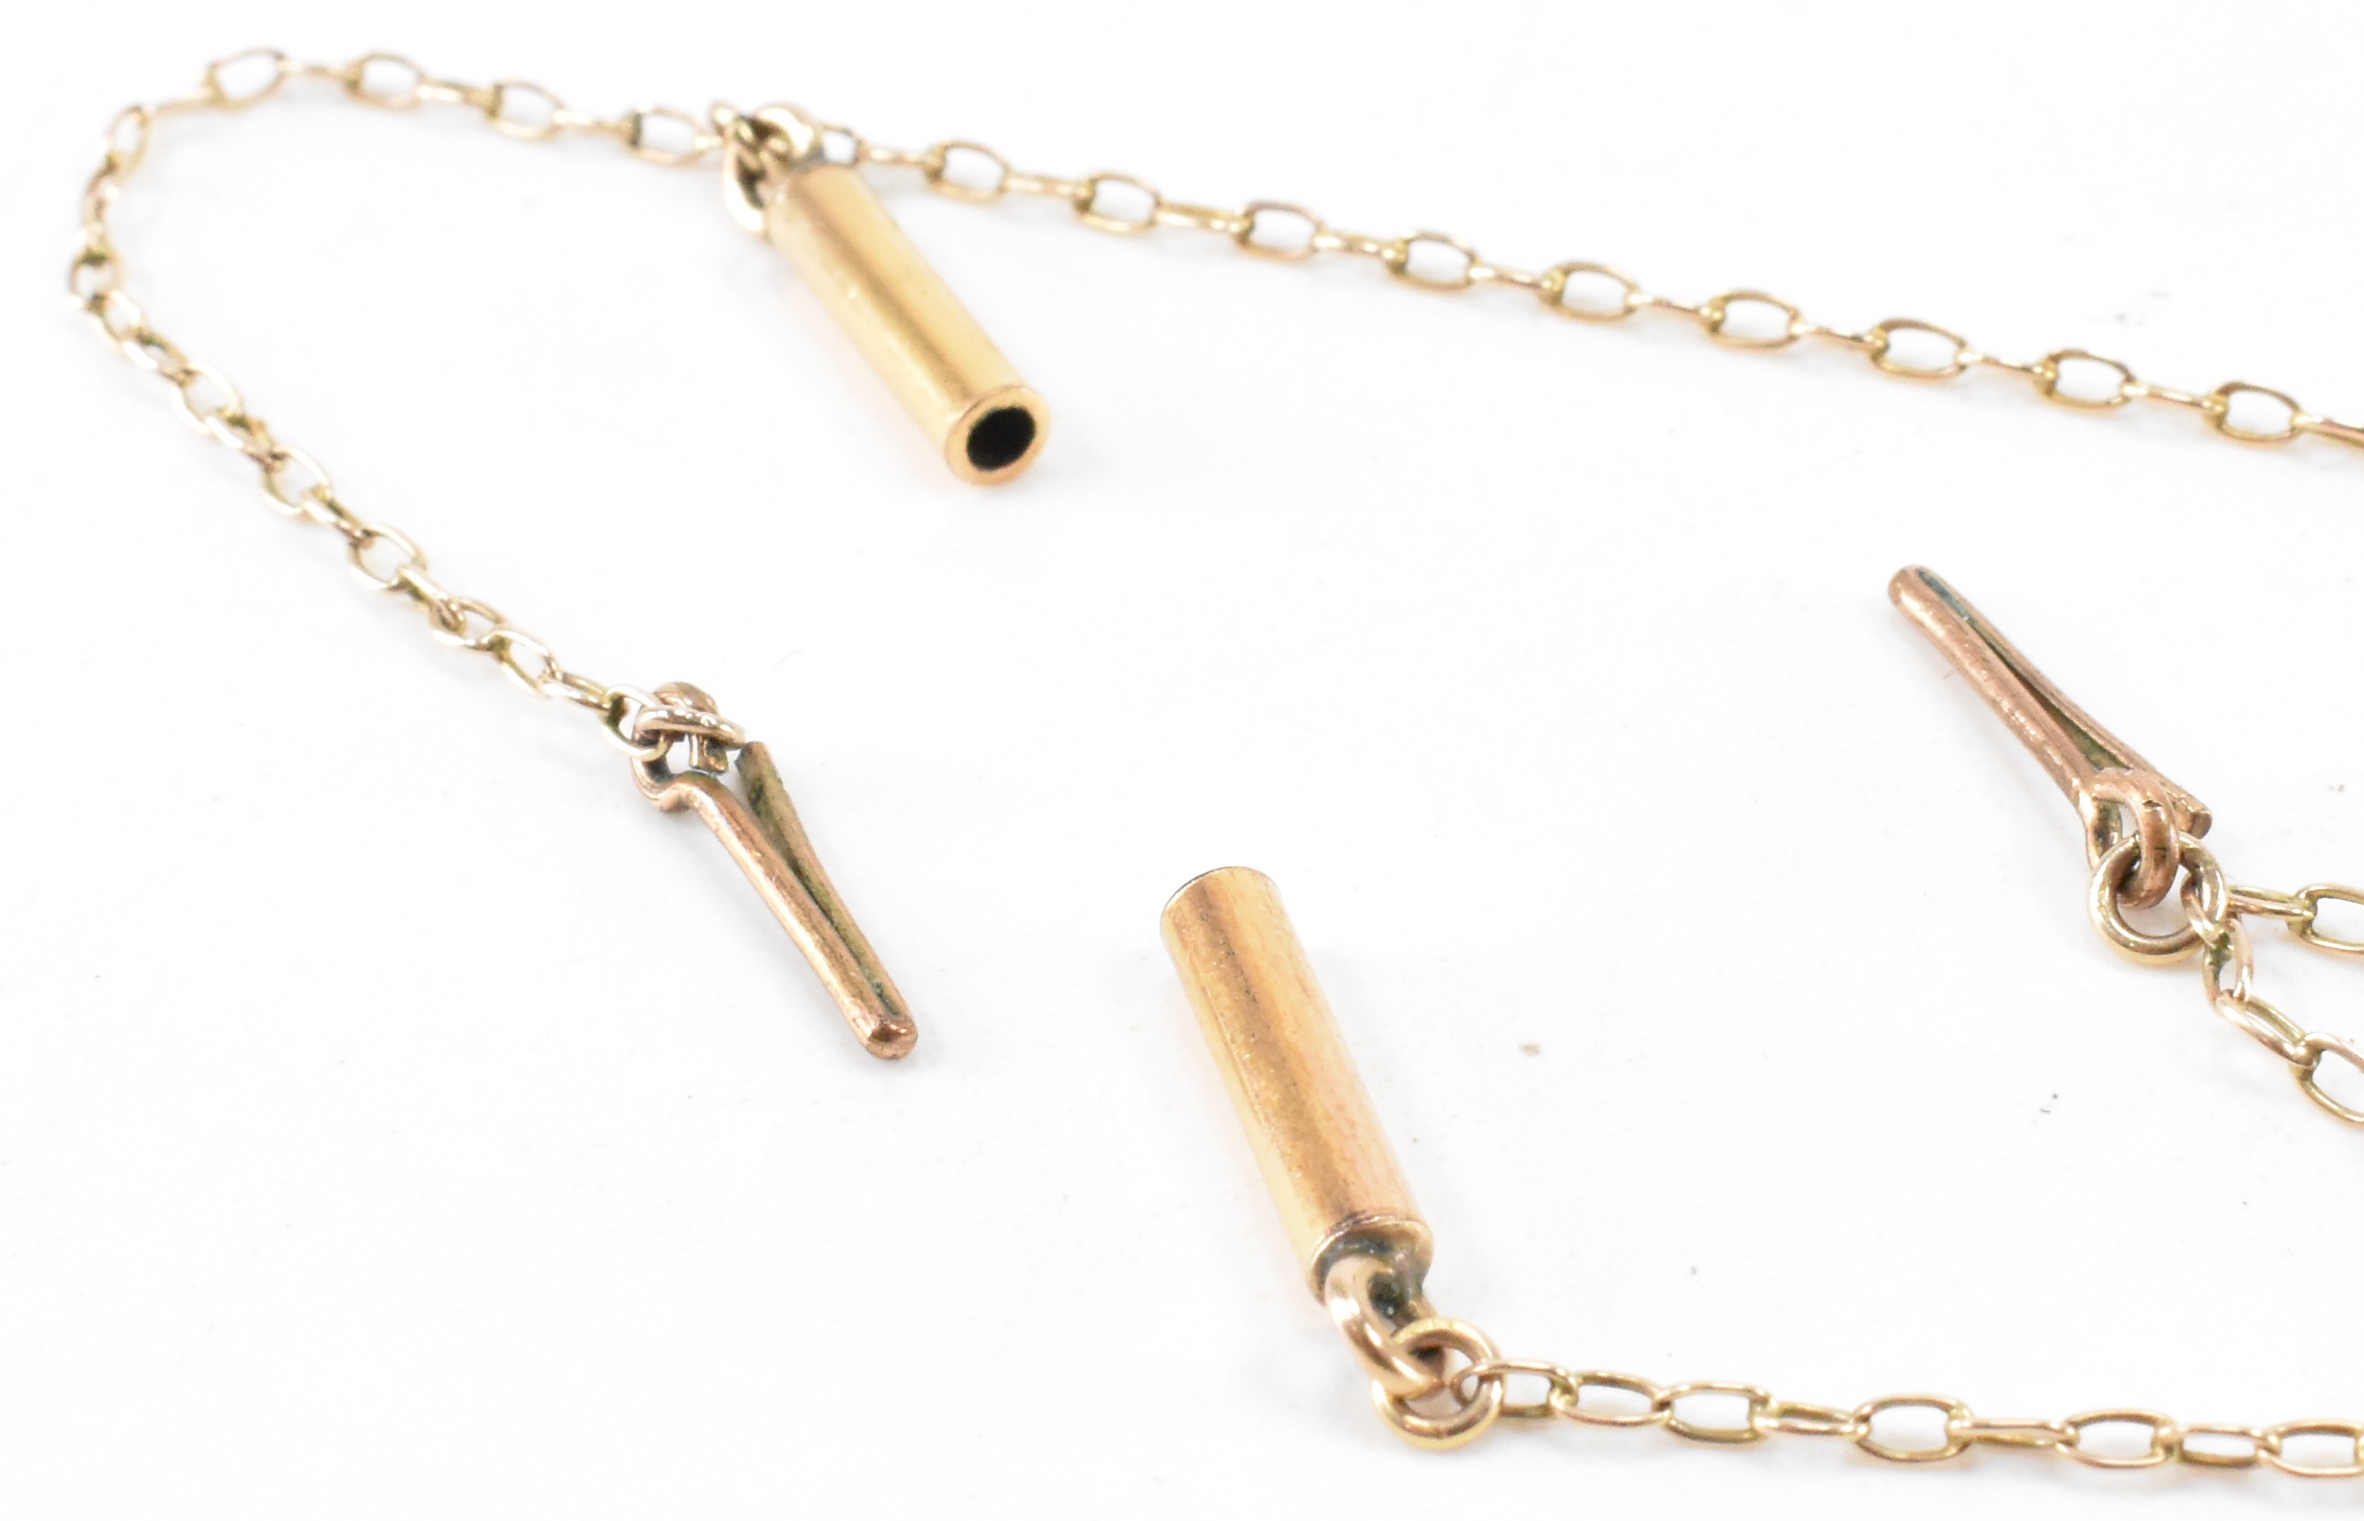 VICTORIAN GOLD SEEDPEARL & PASTE SWALLOW NECKLACE - Image 8 of 9